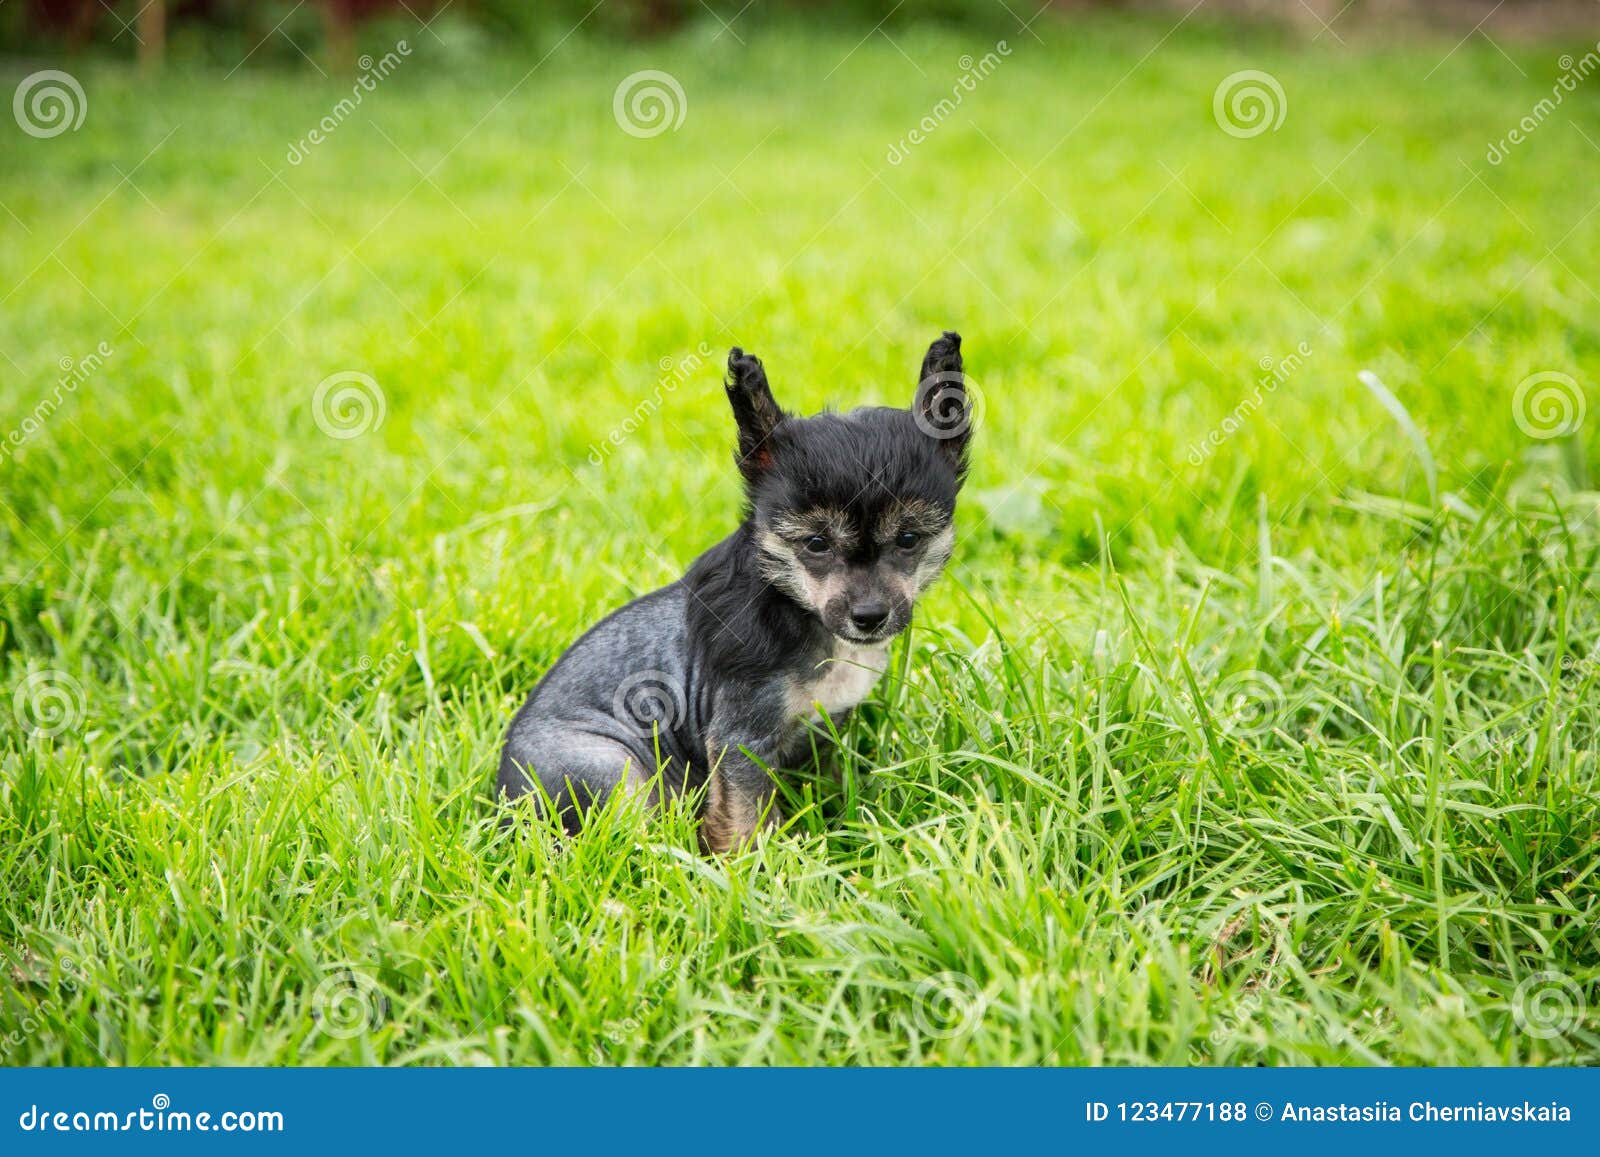 Portrait Of Black Hairless Puppy Breed Chinese Crested Dog Sitting In The Green Grass On Summer Day Stock Photo Image Of Puff Puppy 123477188